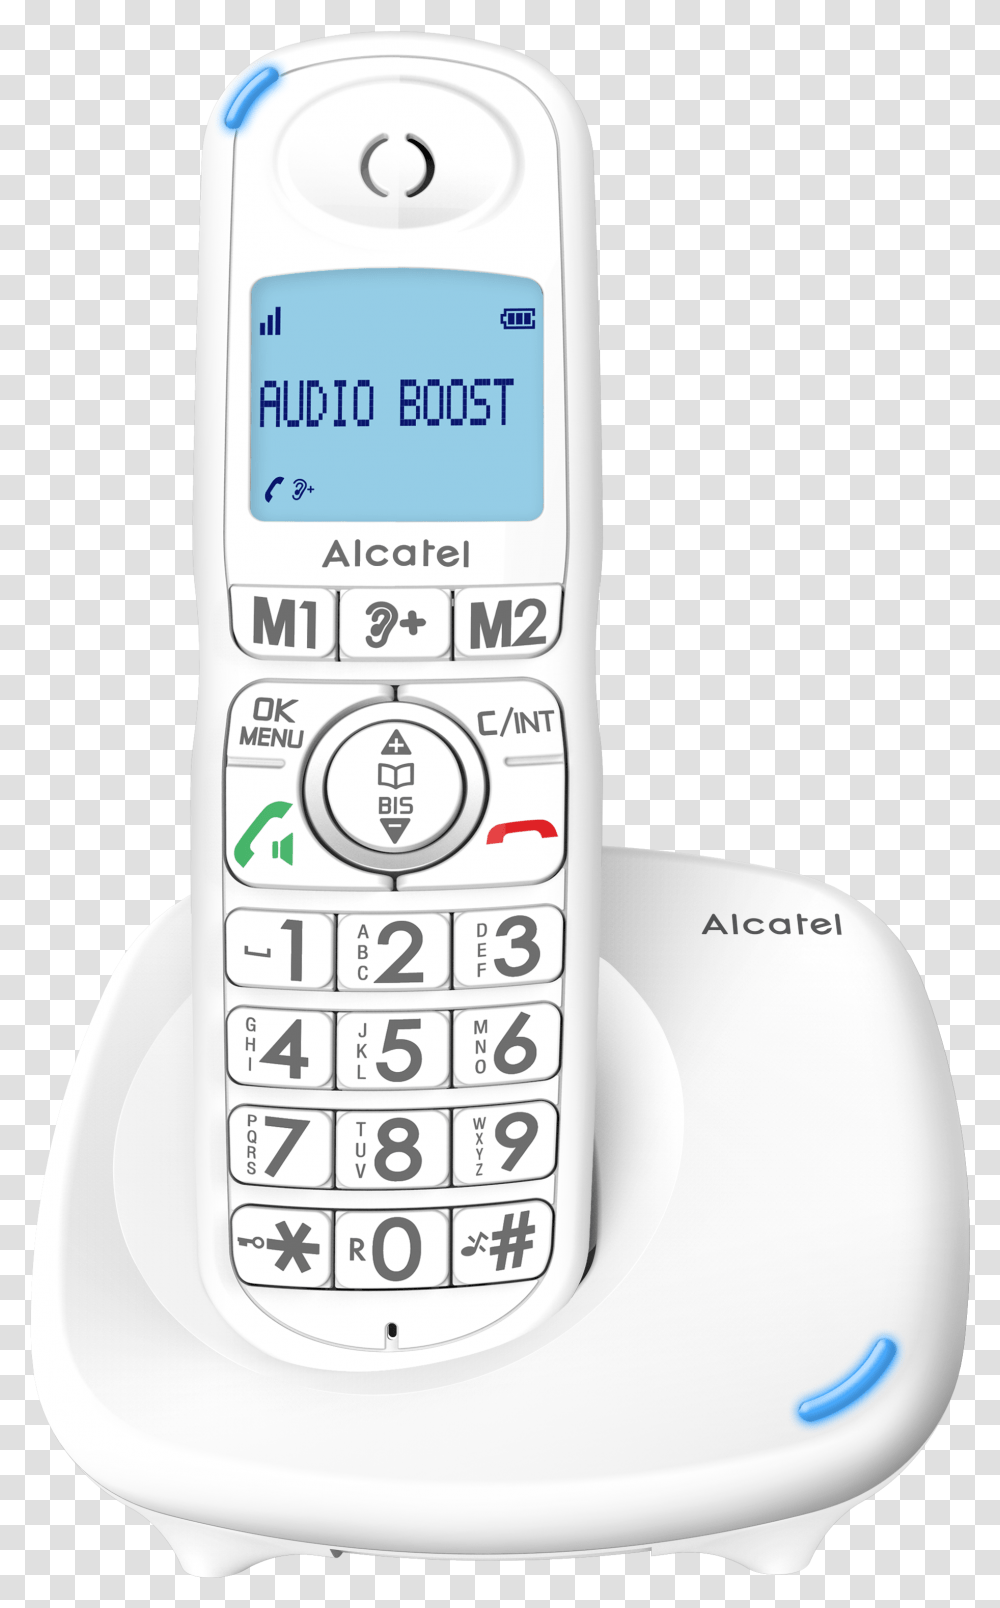 Alcatel Xl575 Mobile Phone, Electronics, Cell Phone Transparent Png